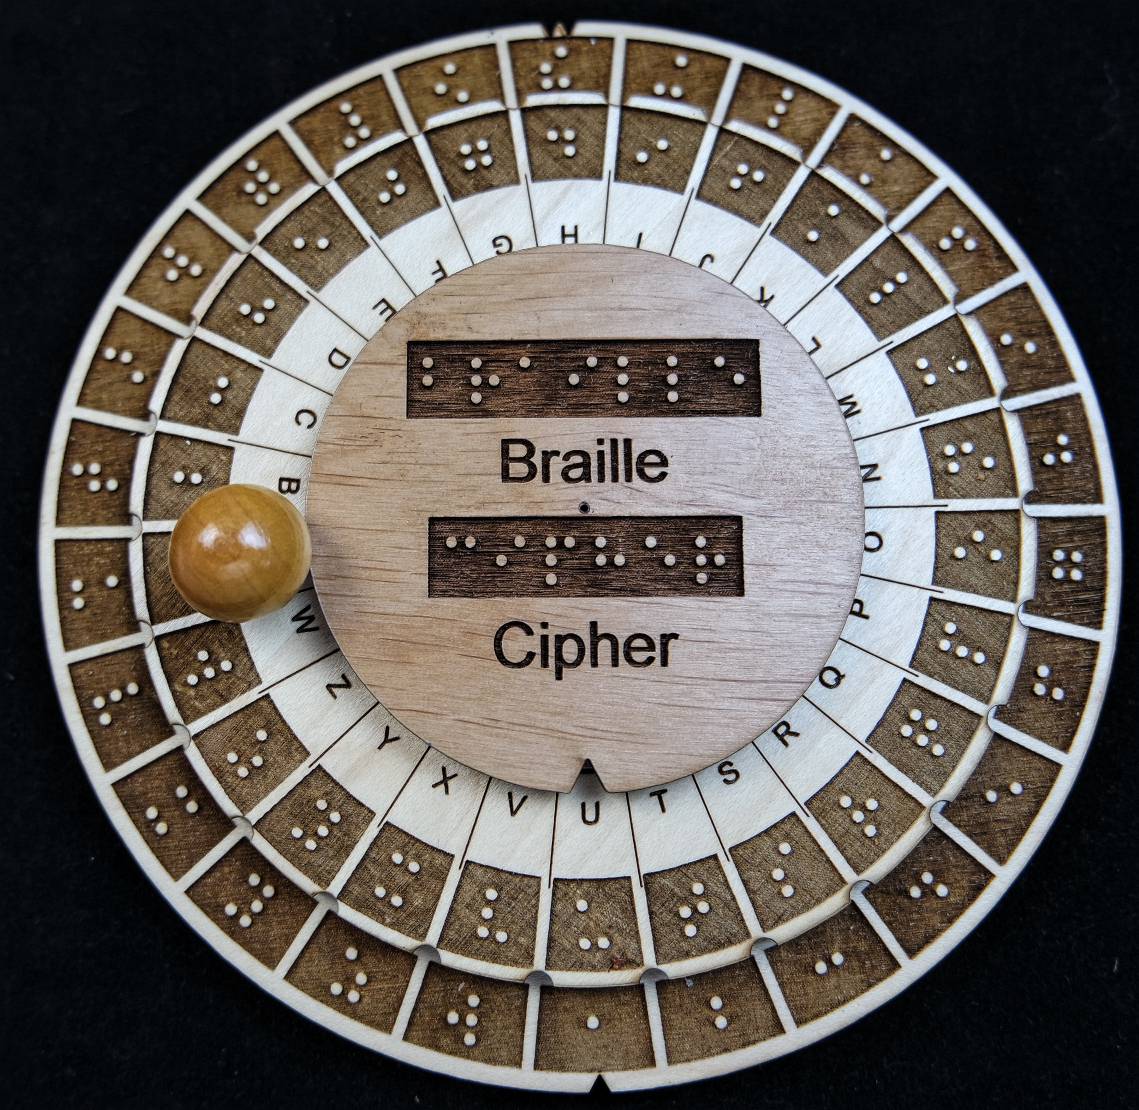 Braille Cipher- Encryption device for the blind